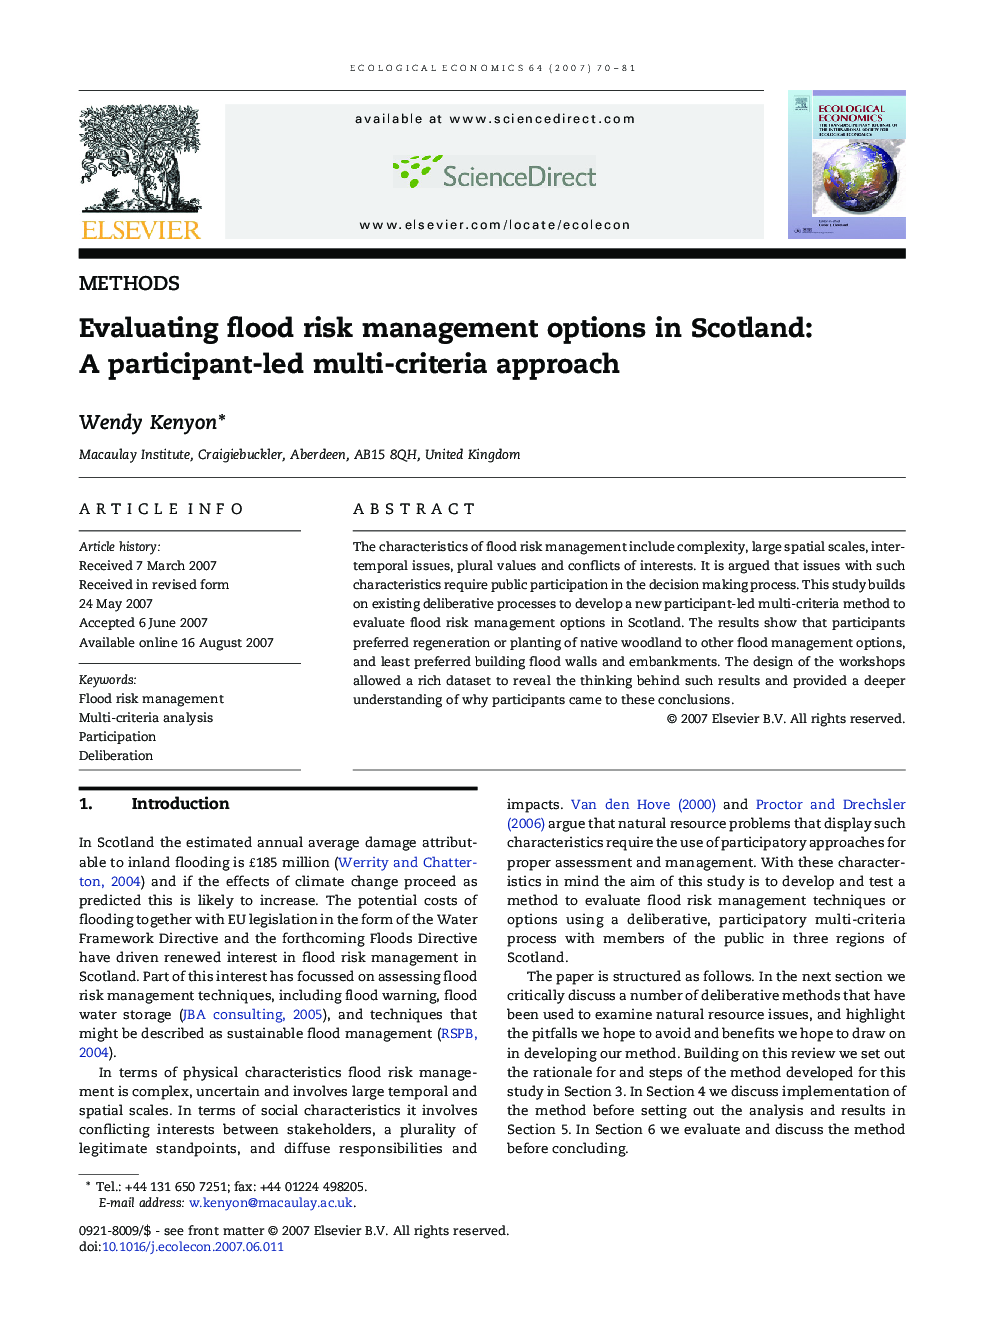 Evaluating flood risk management options in Scotland: A participant-led multi-criteria approach